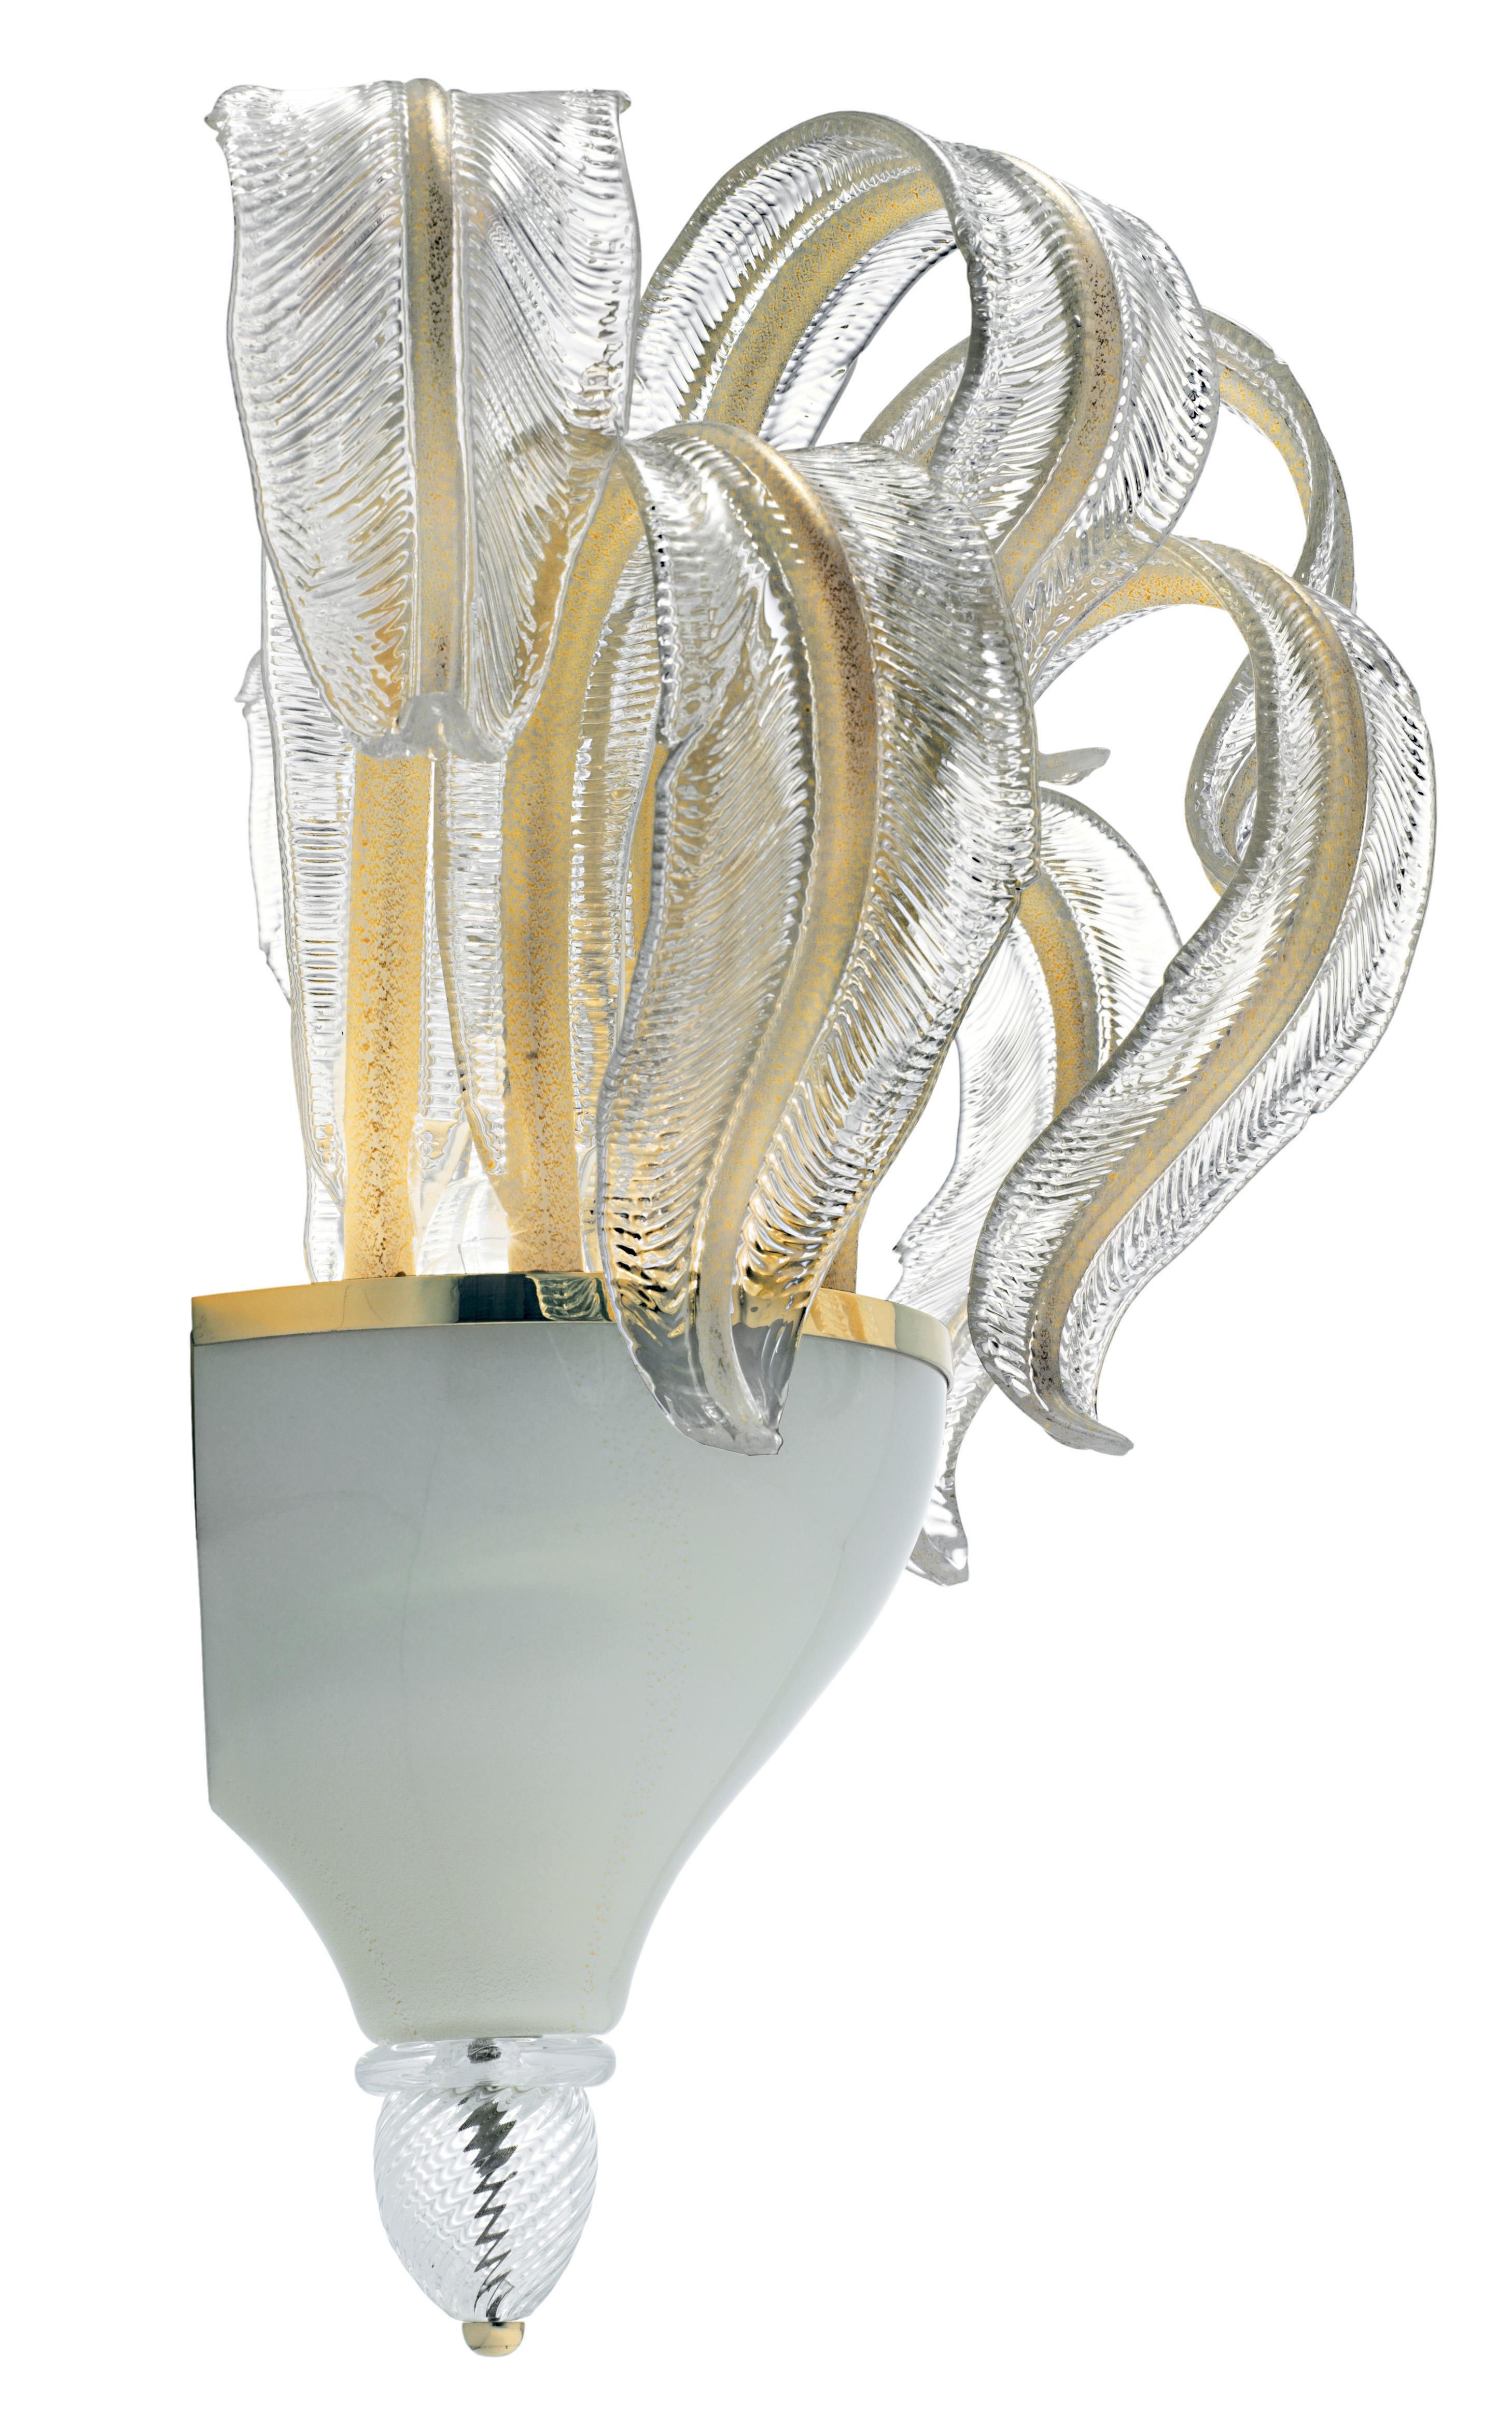 Here you are shown the Piume 5391 wall sconce in beige gold glass and polished brass finishing. The Piume is an outstanding series of suspension, ceiling lamps and wall sconces featuring elements fashioned with the traditional techniques of Murano